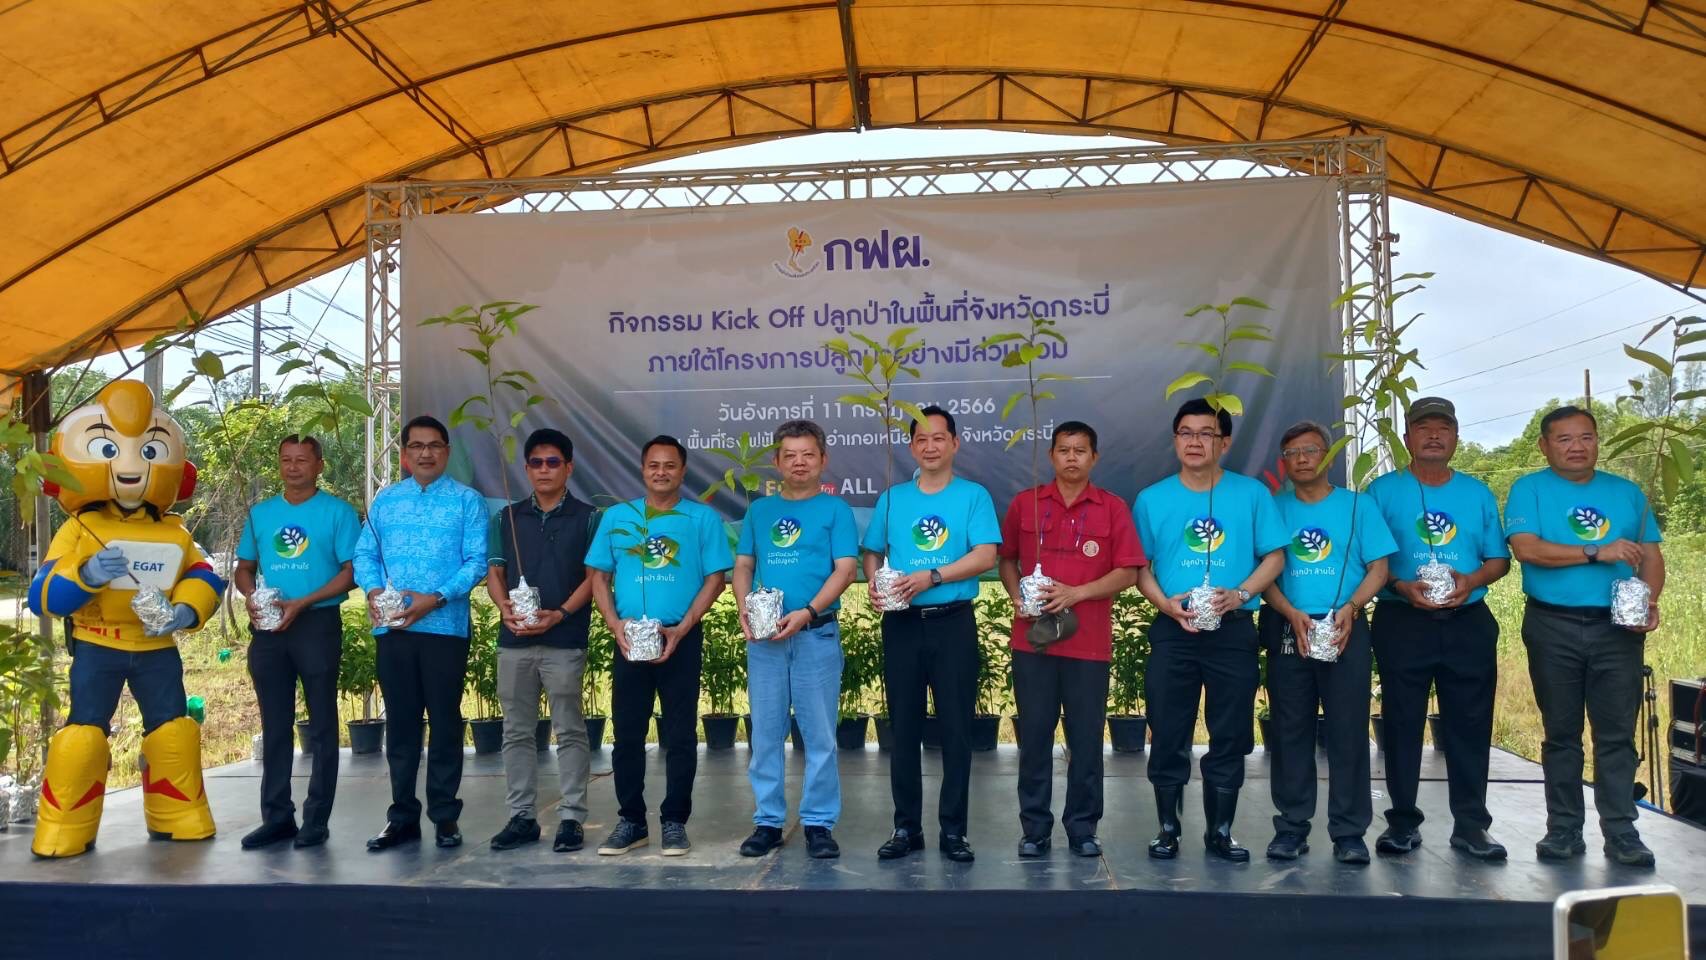 EGAT keeps planting forests to expand green area in Krabi Province and promote community engagement in ecosystem restoration